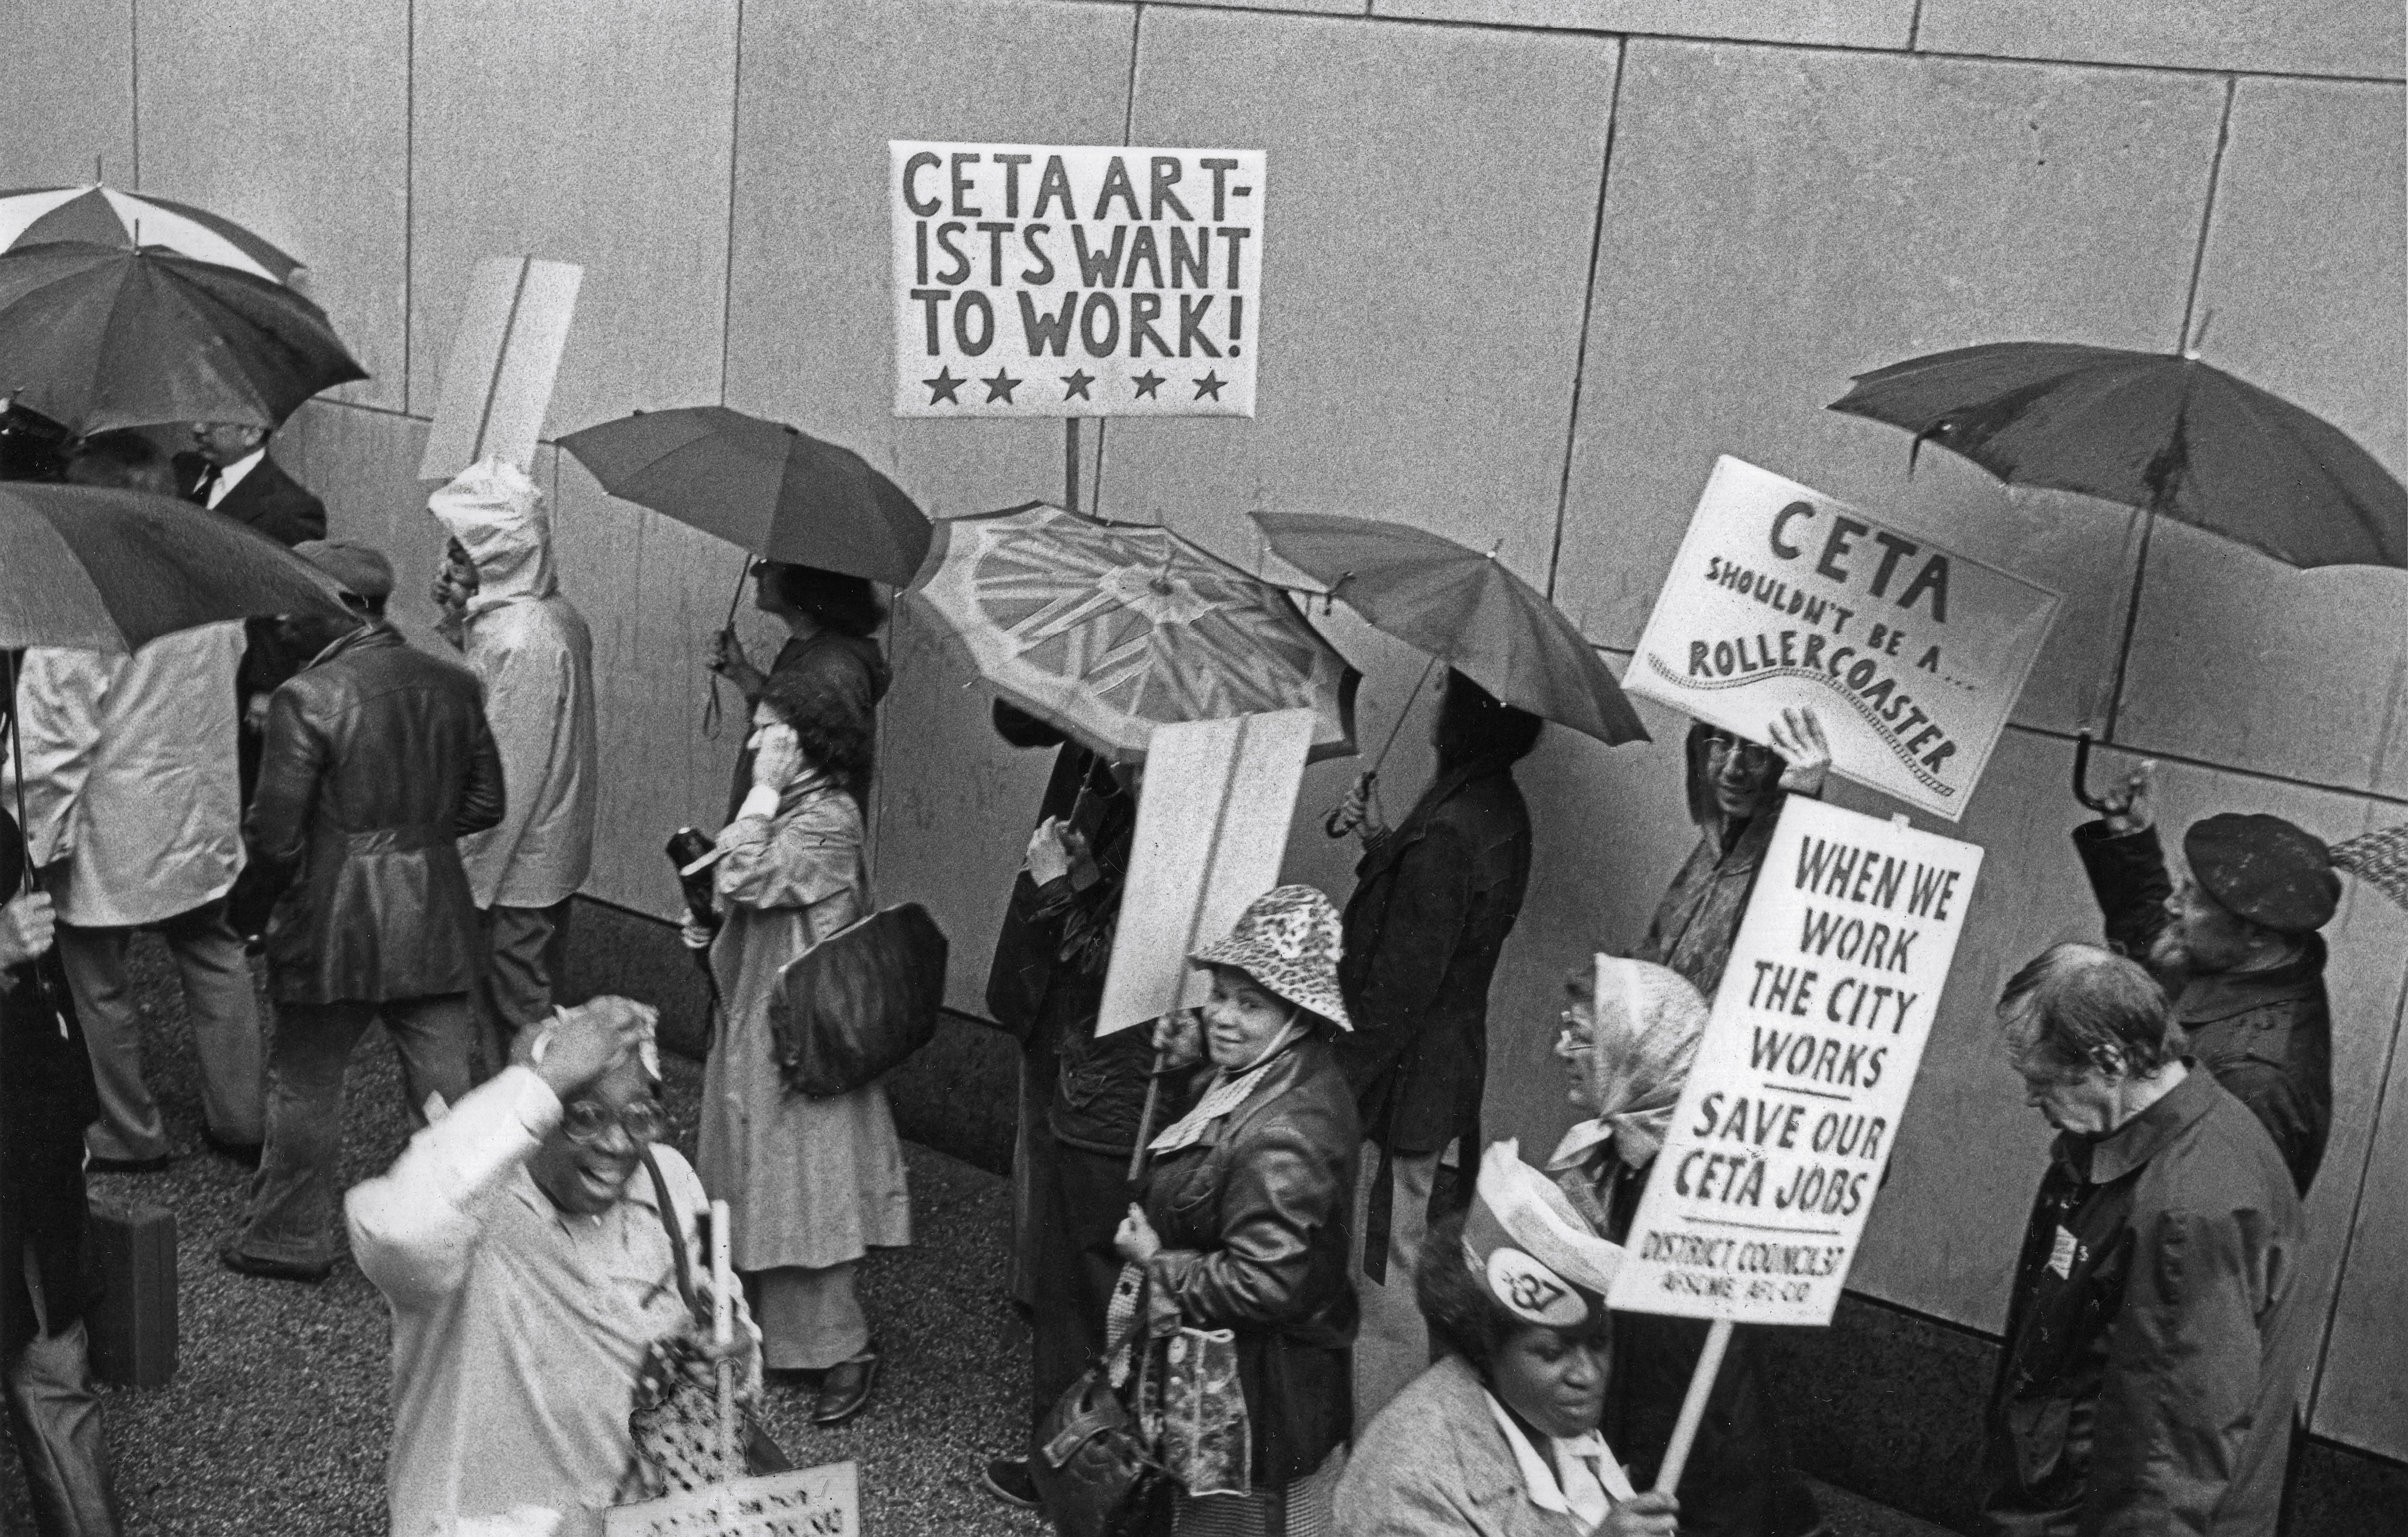 Black and white photograph of multi-racial group of people protesting in the rain outside a large concrete building. Several people are carrying umbrellas, and three signs that read "CETA Artists Want to Work!"; "CETA Shouldn't Be A Rollercoaster"; and "When We Work the City Works: Save Our CETA Jobs."